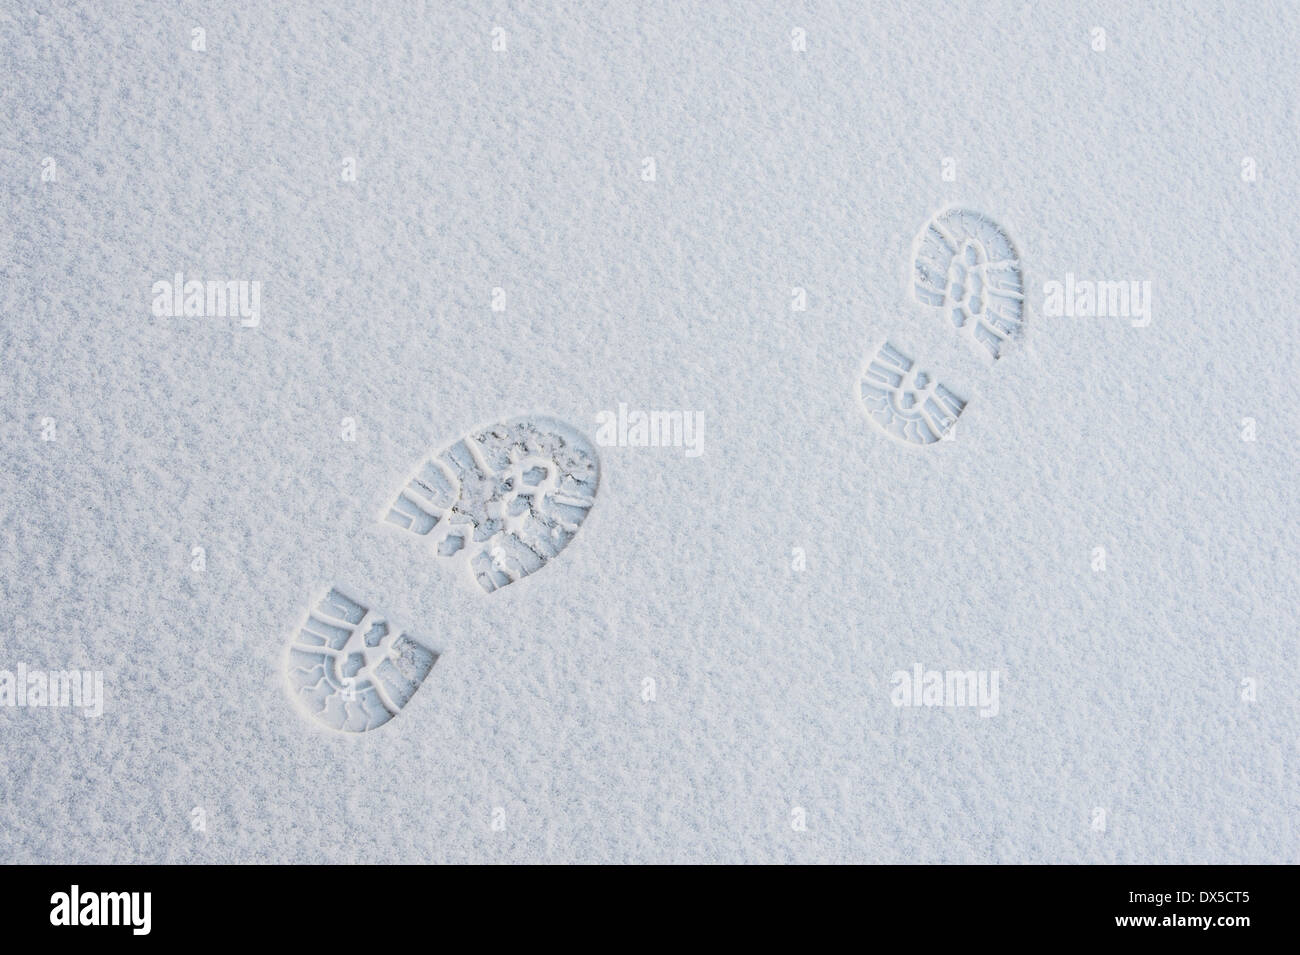 Footprints in snow Banque D'Images